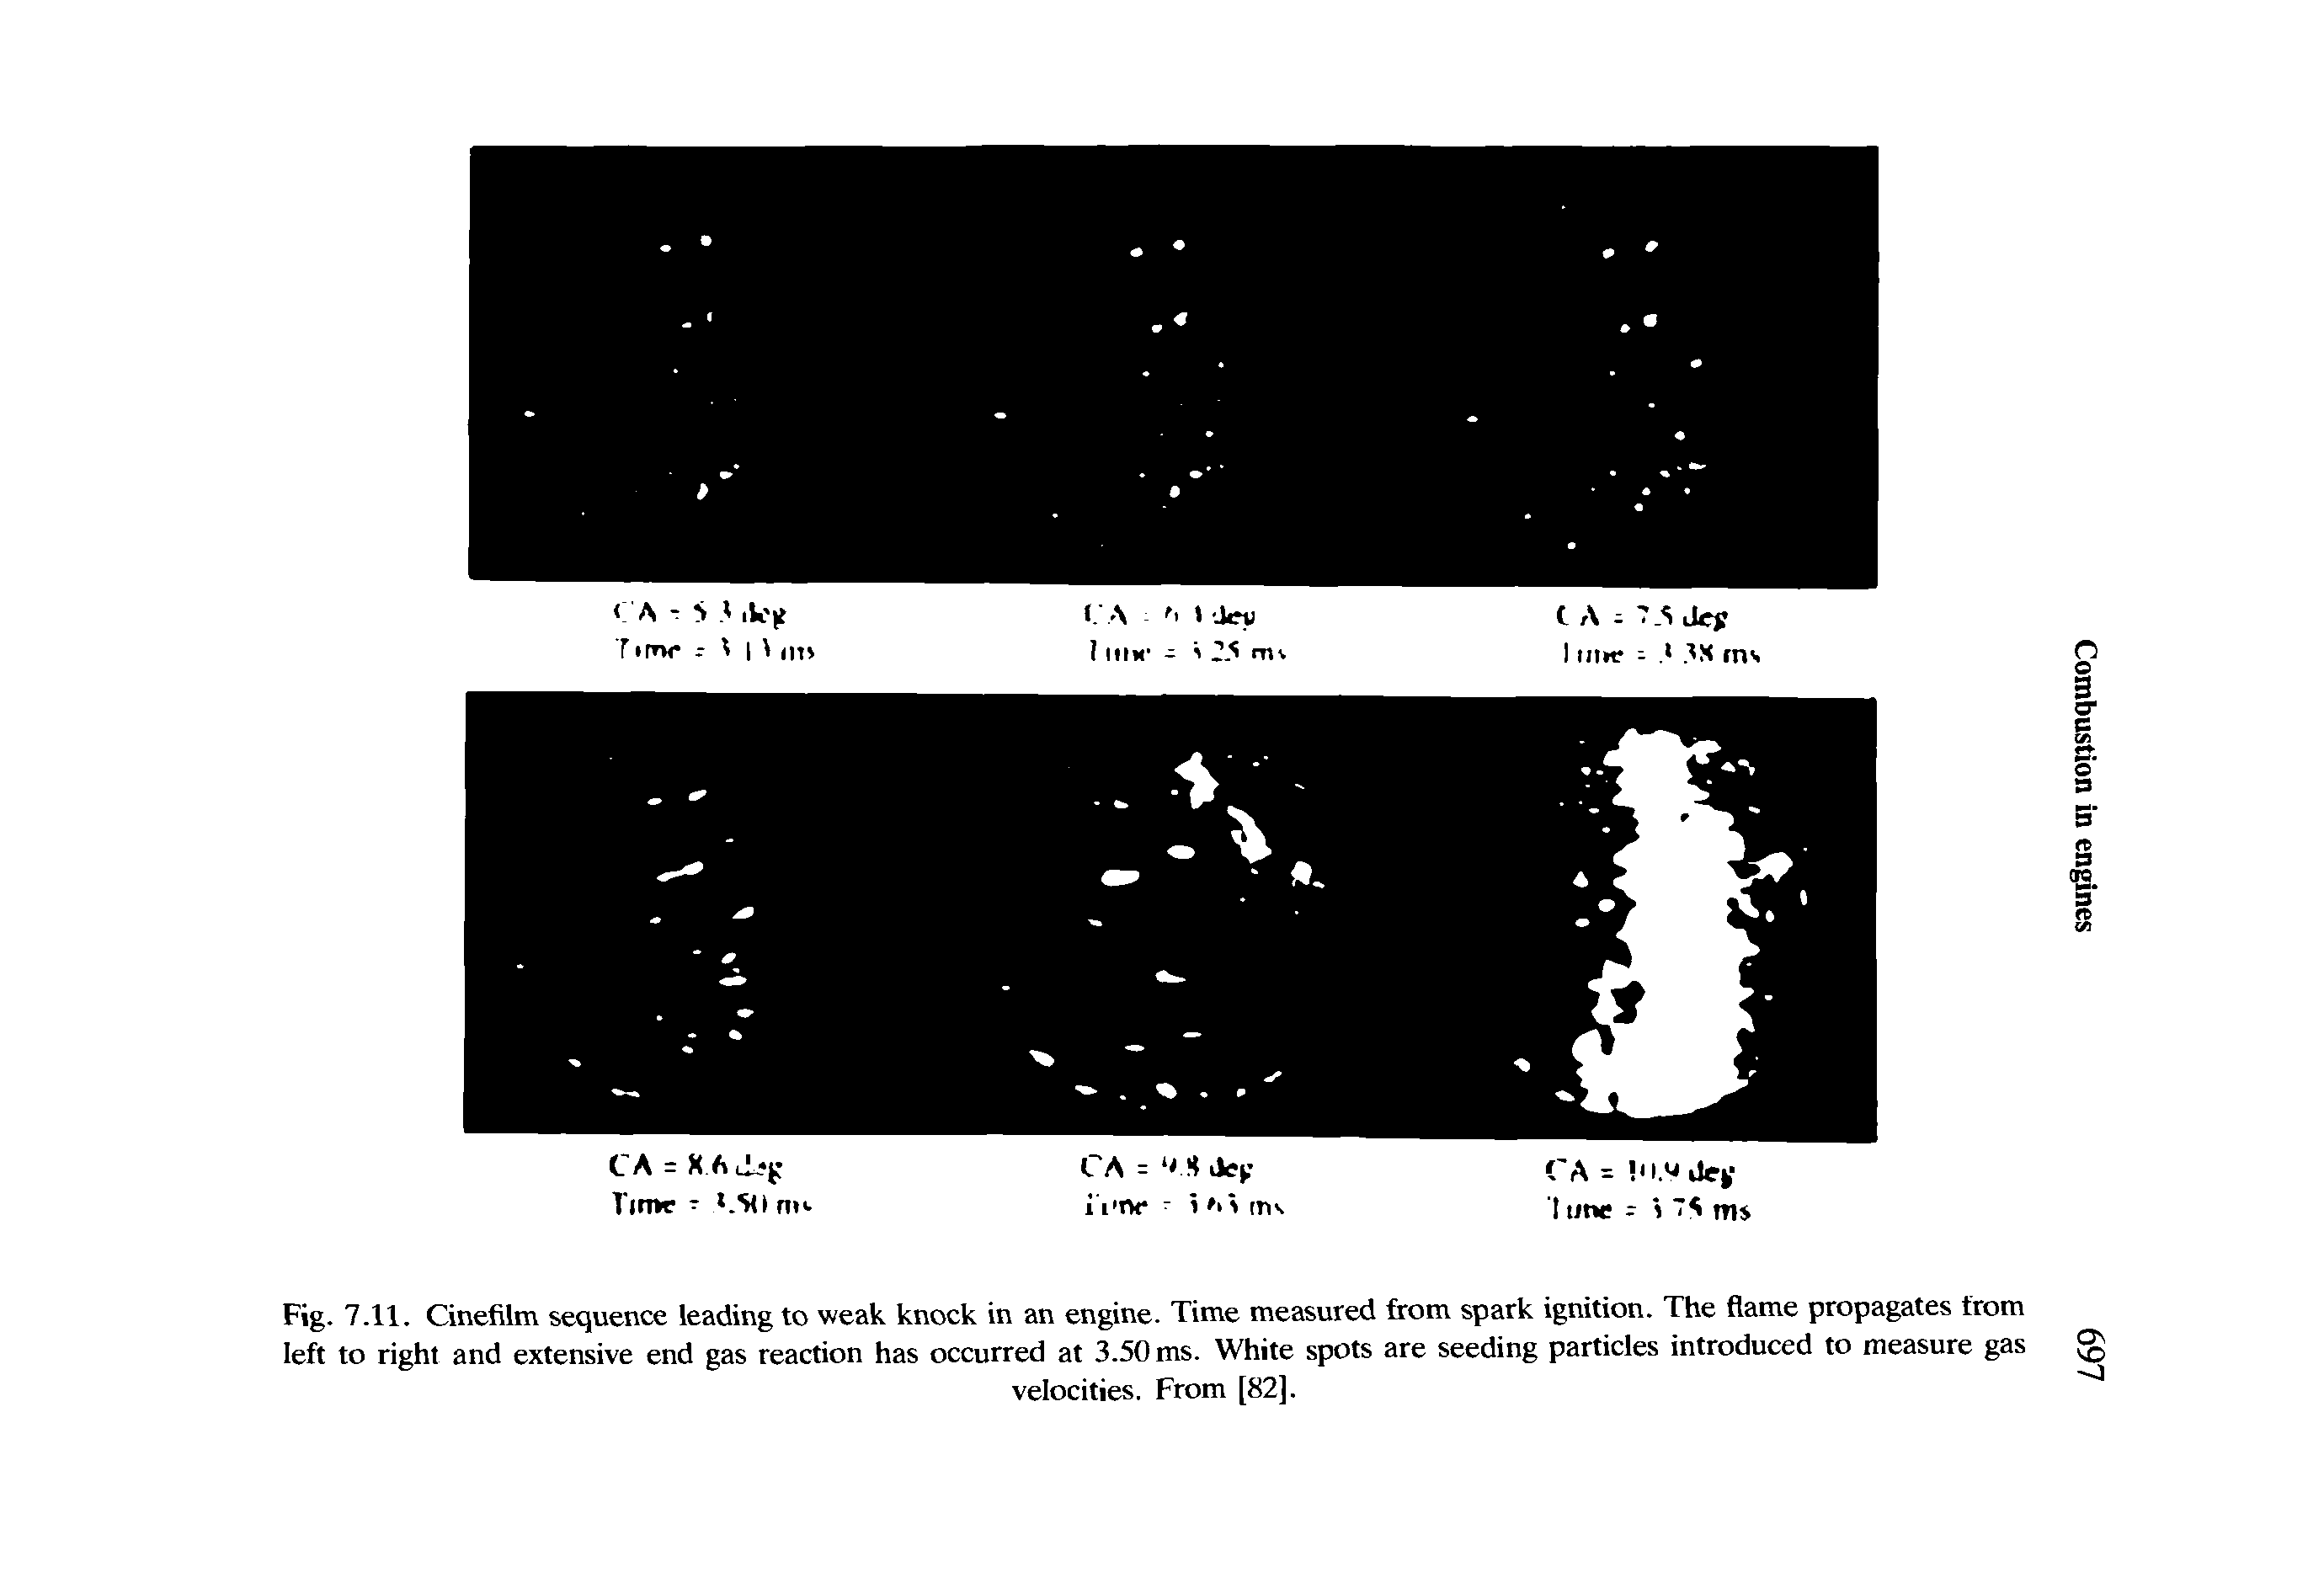 Fig. 7.11. Cinefilm sequence leading to weak knock in an engine. Time measured from spark ignition. The flame propagates from left to right and extensive end gas reaction has occurred at 3.50 ms. White spots are seeding particles introduced to measure gas...